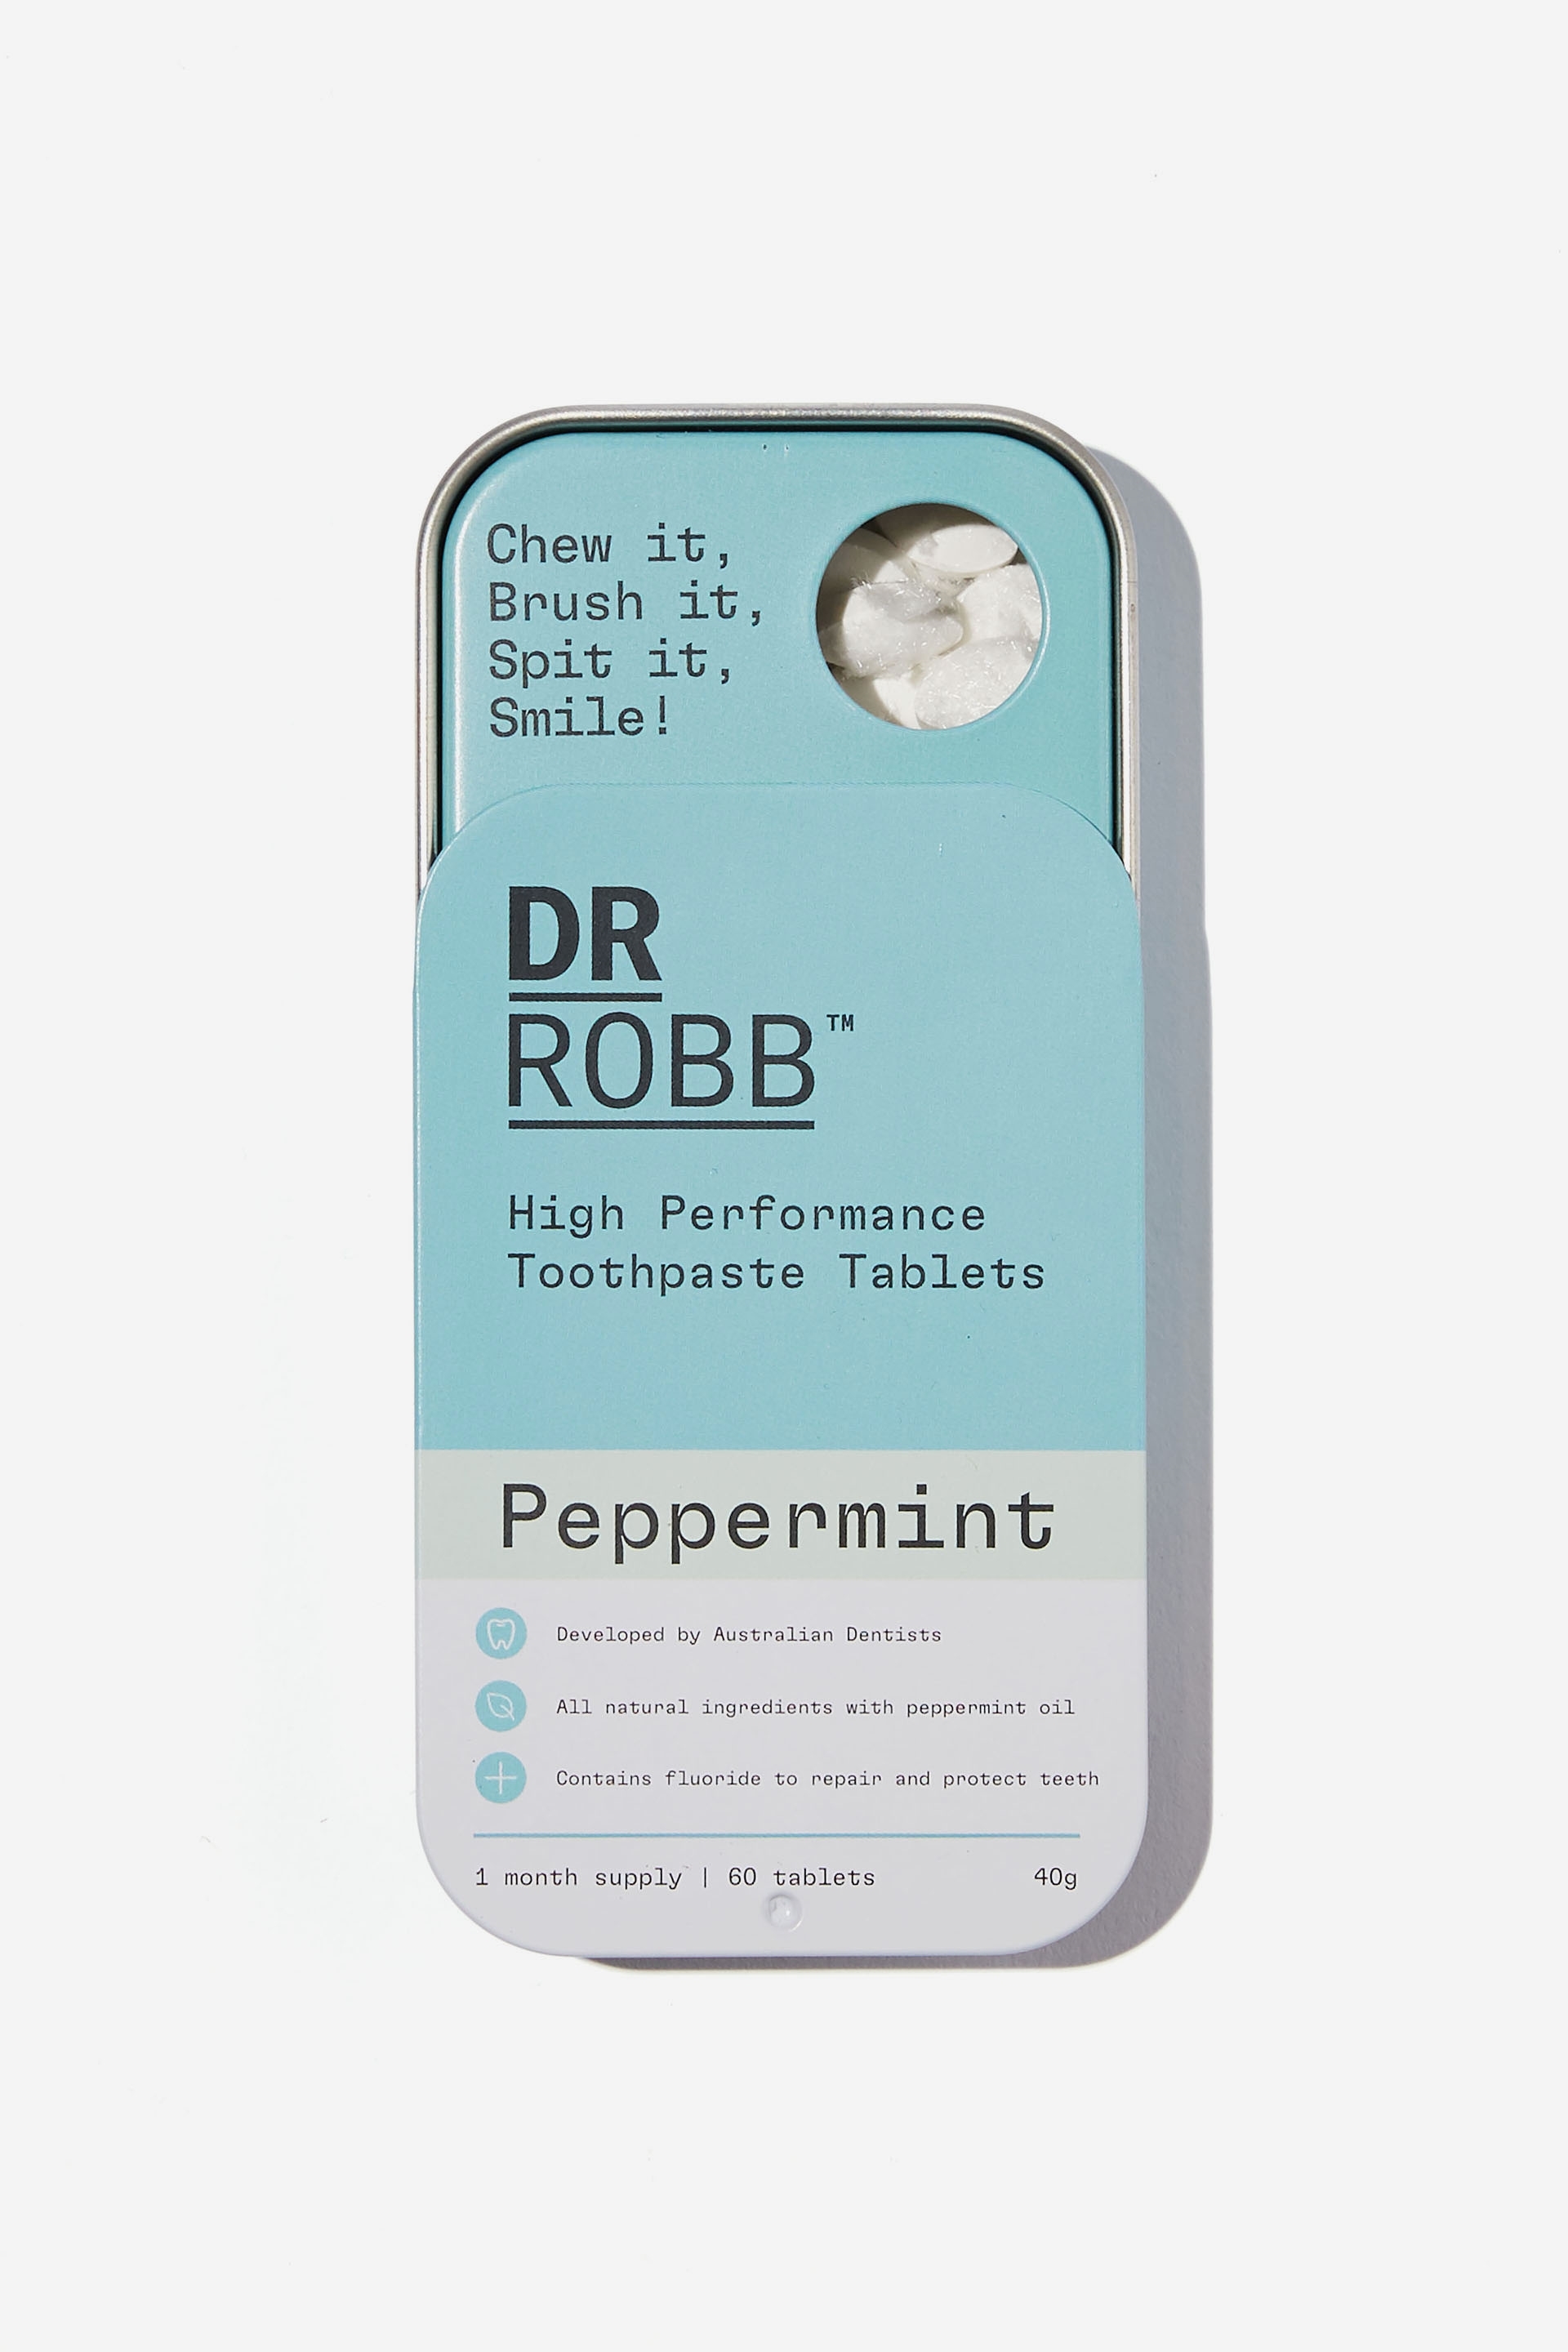 Cotton On Foundation - Dr Robb High Performance Toothpaste Tablets - Peppermint